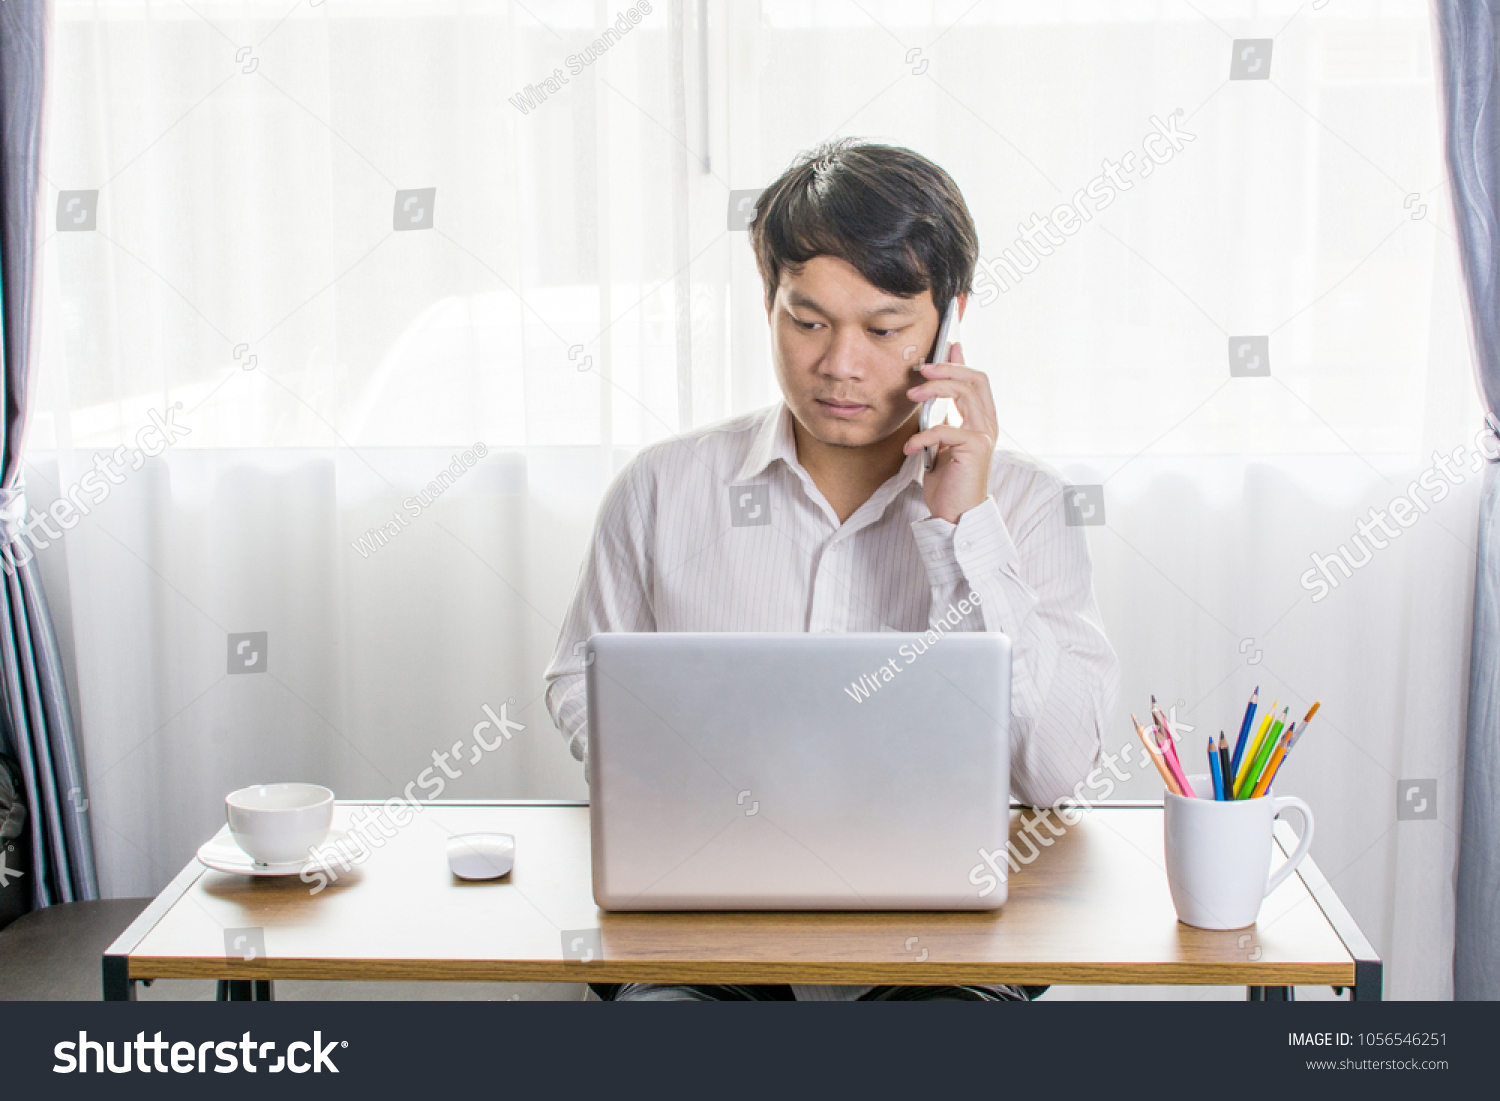 View workspace mockup concept with laptop on home office or studio. Close up of man working determine lifestyle concept. Mock up workplace on wooden table with Natural light. windows, East Asian Man. #1056546251